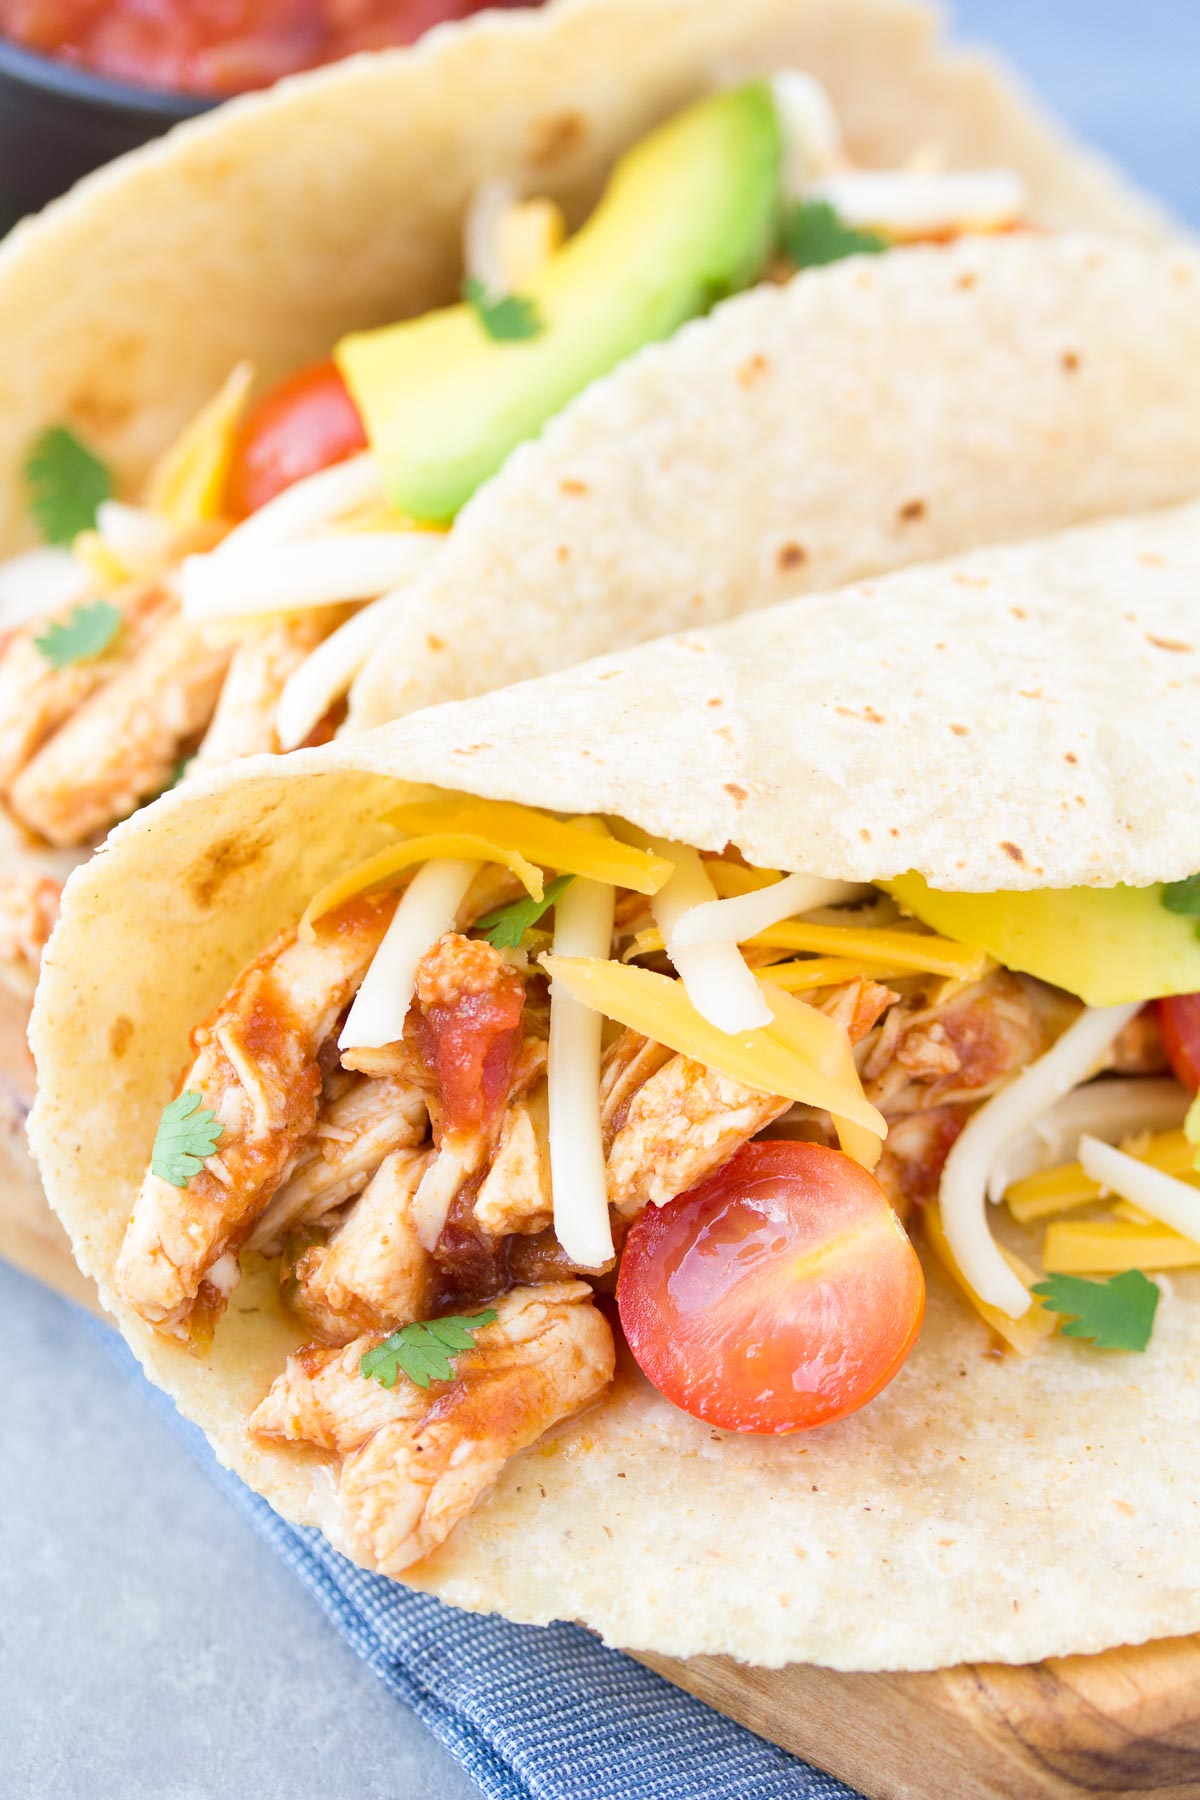 Shredded chicken tacos with salsa, cheese and avocado.